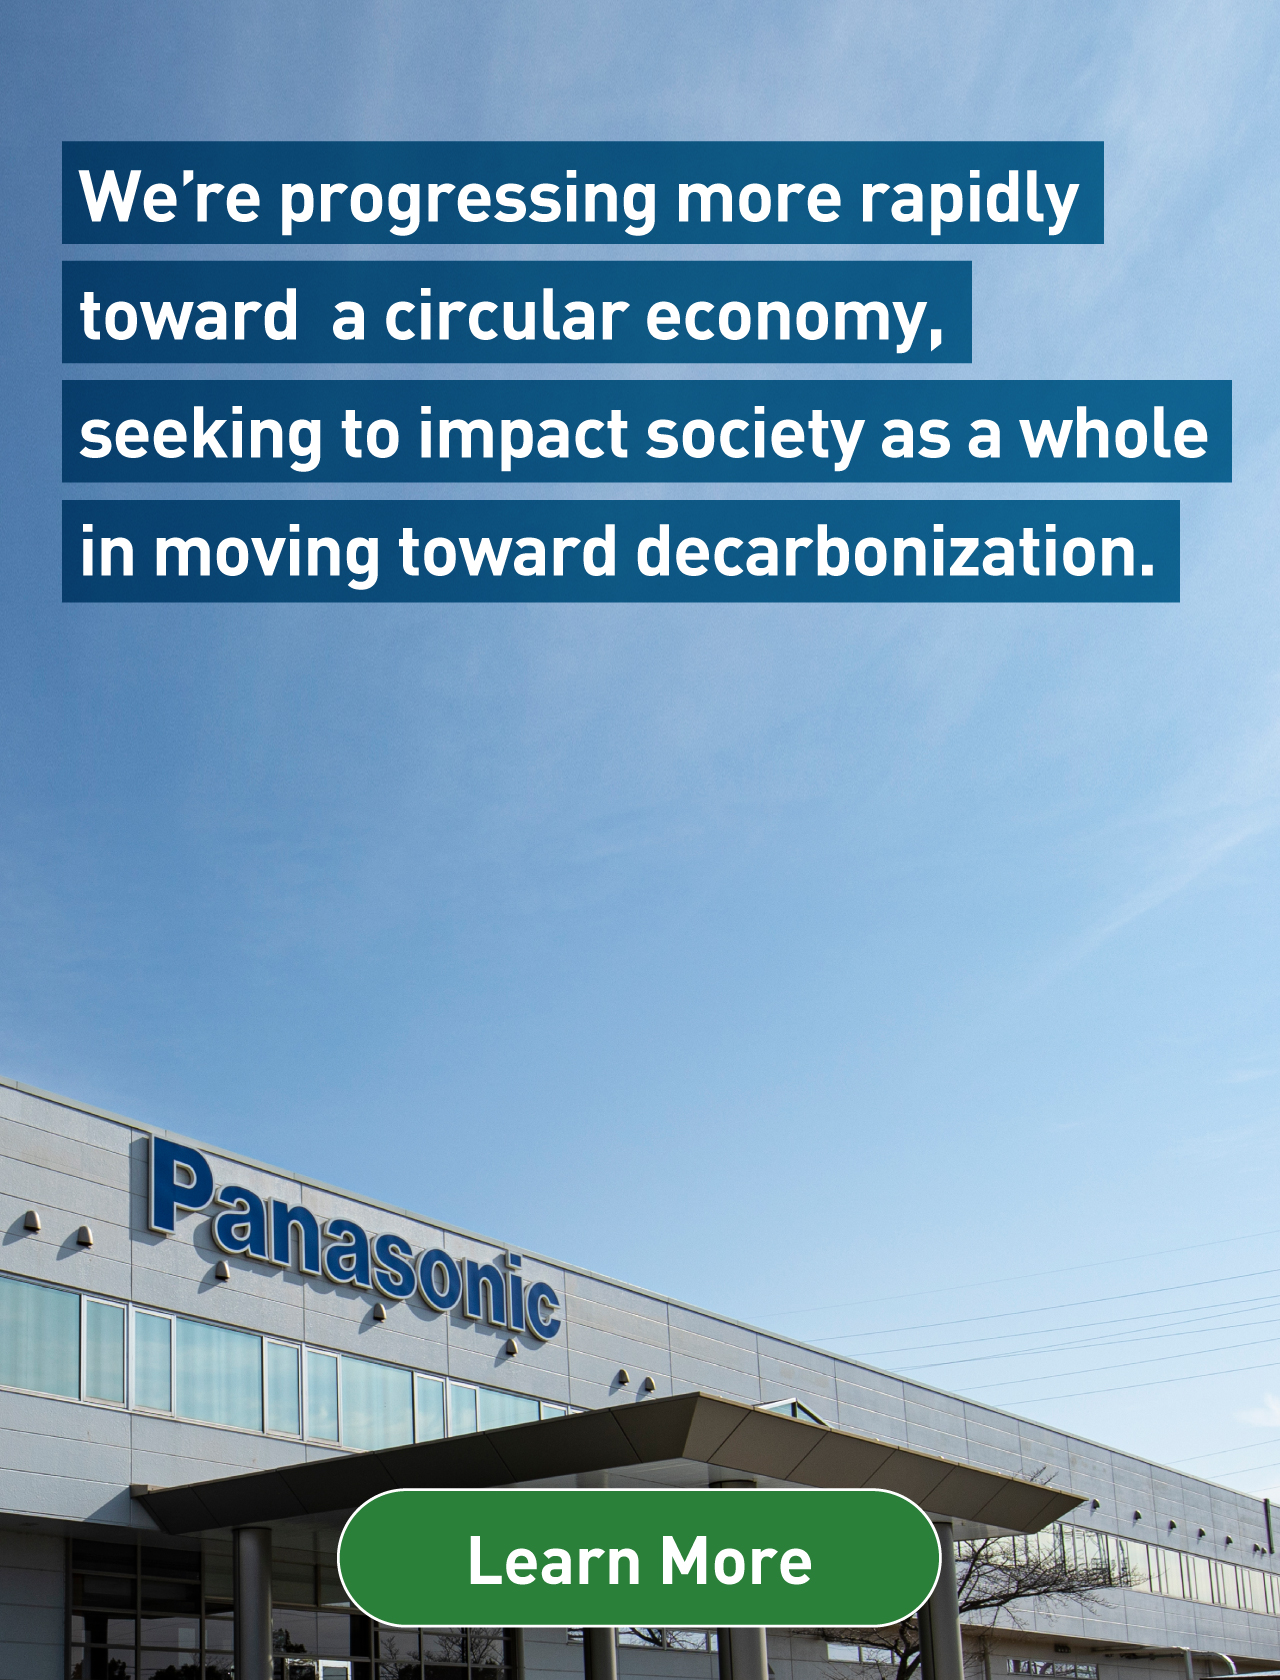 We’re progressing more rapidly toward a circular economy, seeking to impact society as a whole in moving toward decarbonization. Background photo: Entrance of Panasonic headquarters. Learn more.